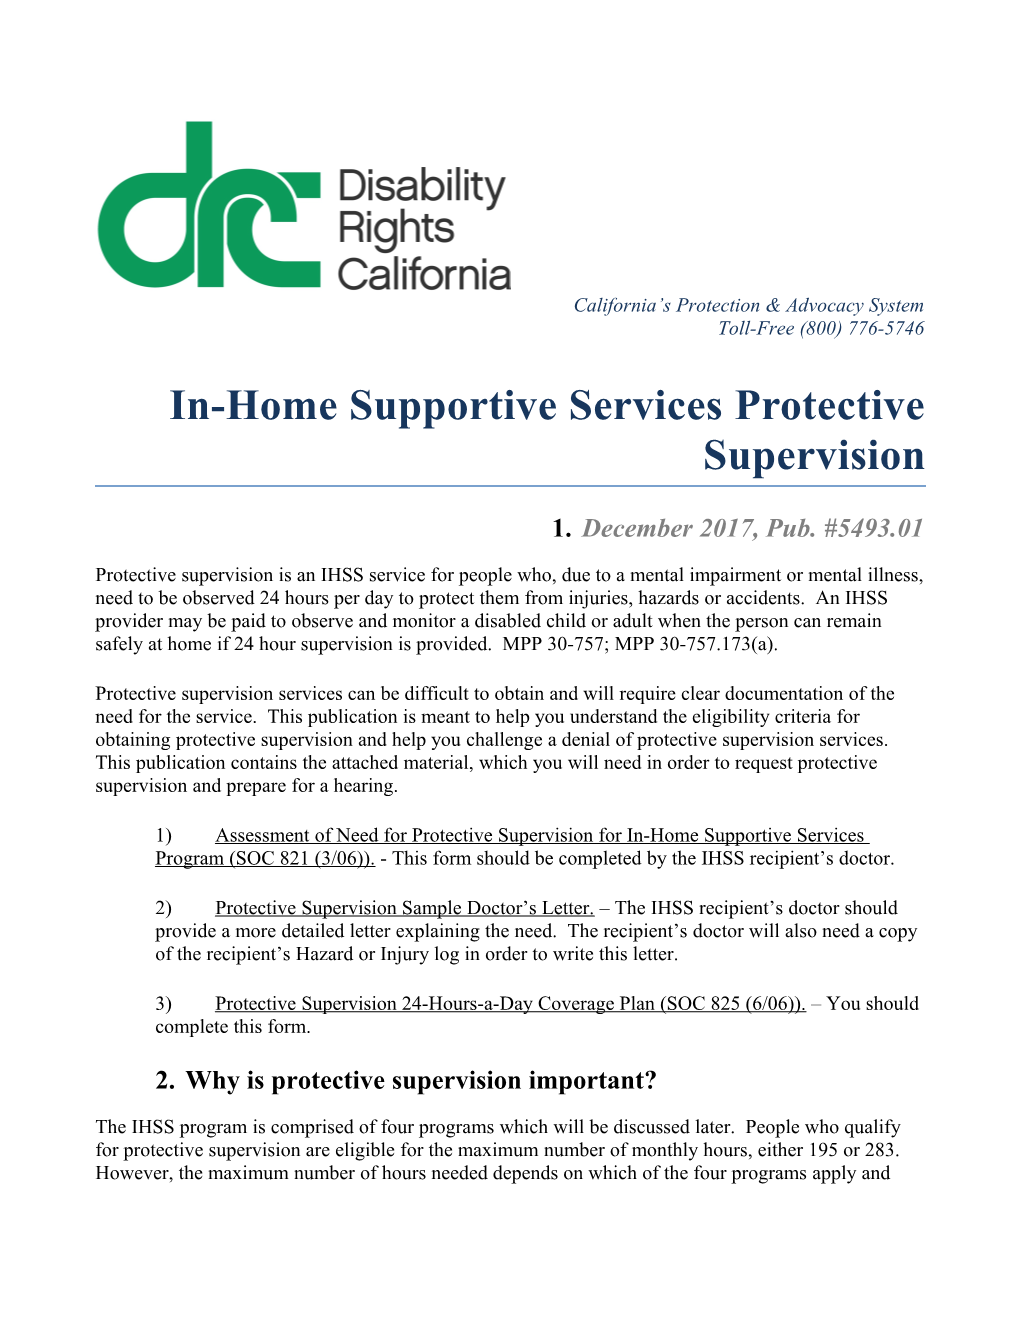 IHSS Protective Supervision Publication